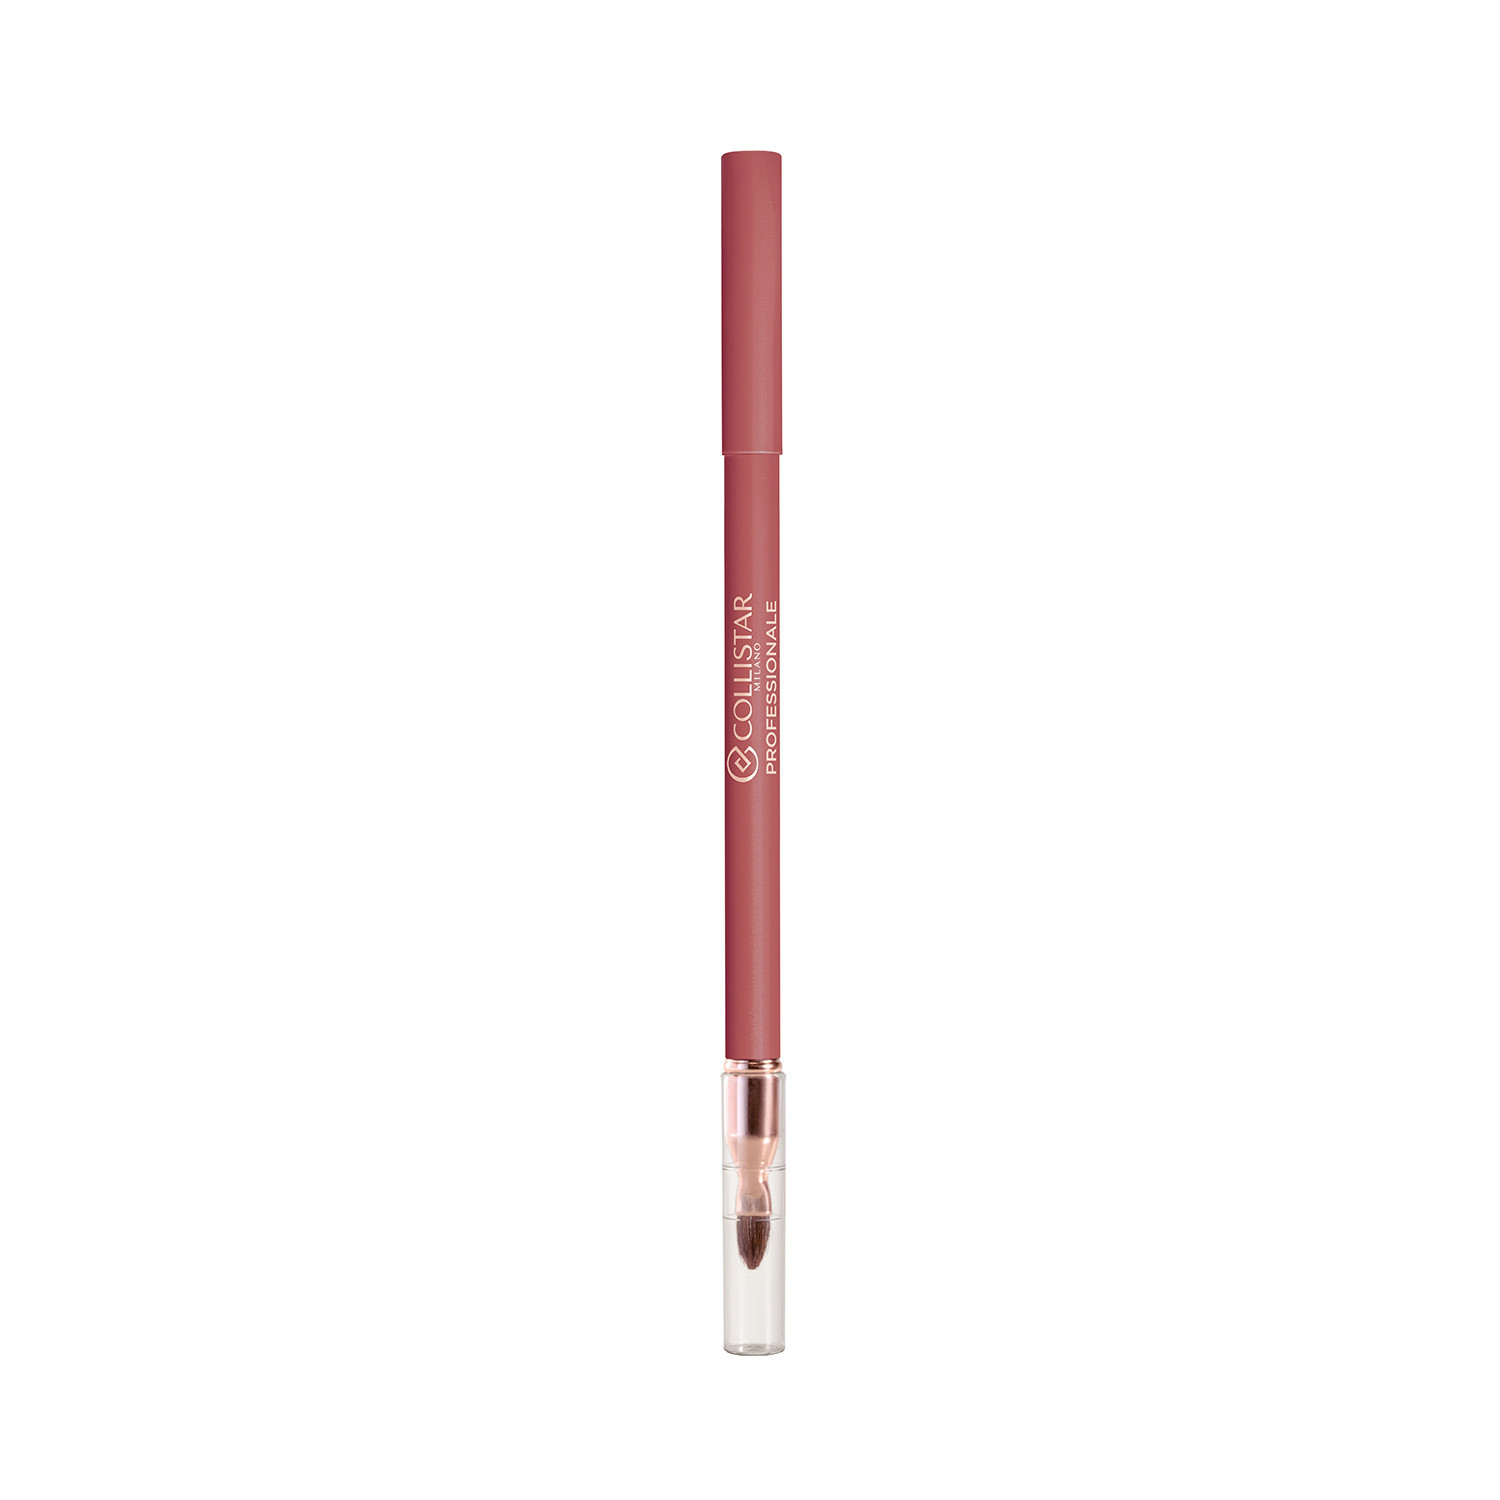 Collistar - Professional long lasting lip pencil - 13 Cameo, Powder Pink, large image number 0